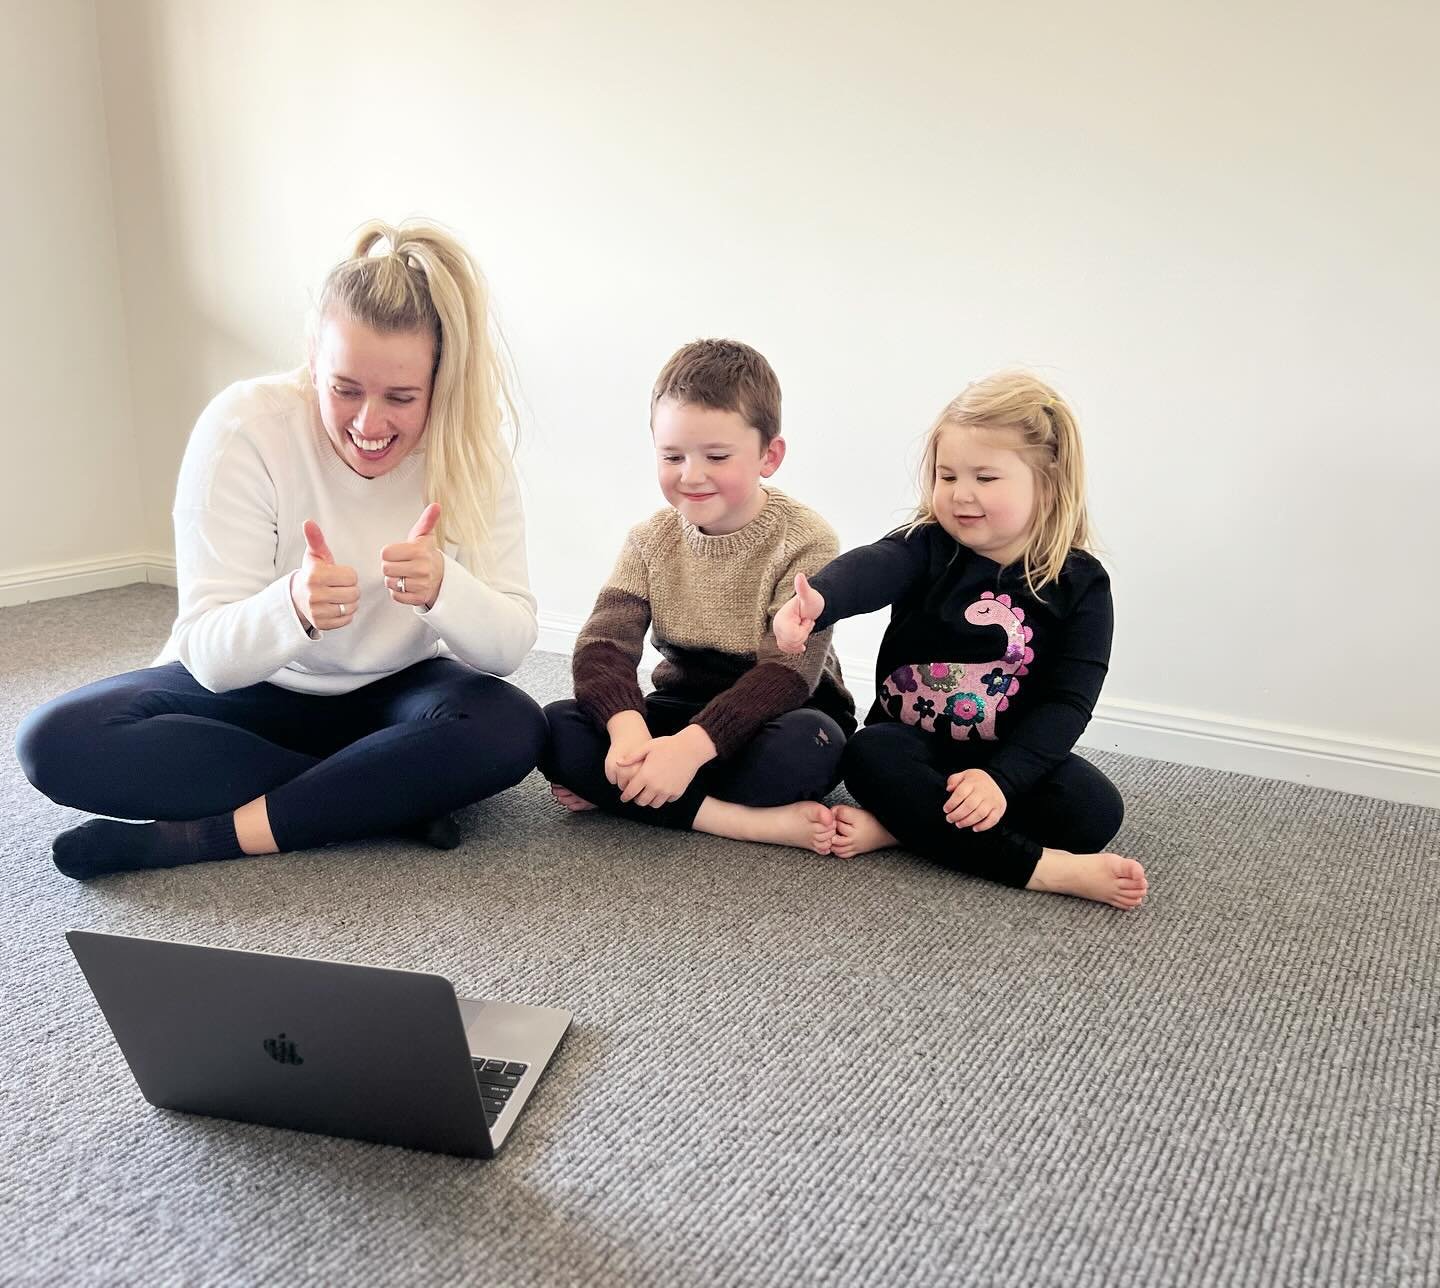 Last week I had the pleasure of sitting into the YOGA GROUP, with a few little mates 🫶🏼💻

What fun we had!! 🥰

Our lovely OT Em targeted so many goals through a beautifully written story, about a little bear 🐻

We spoke about overcoming challeng